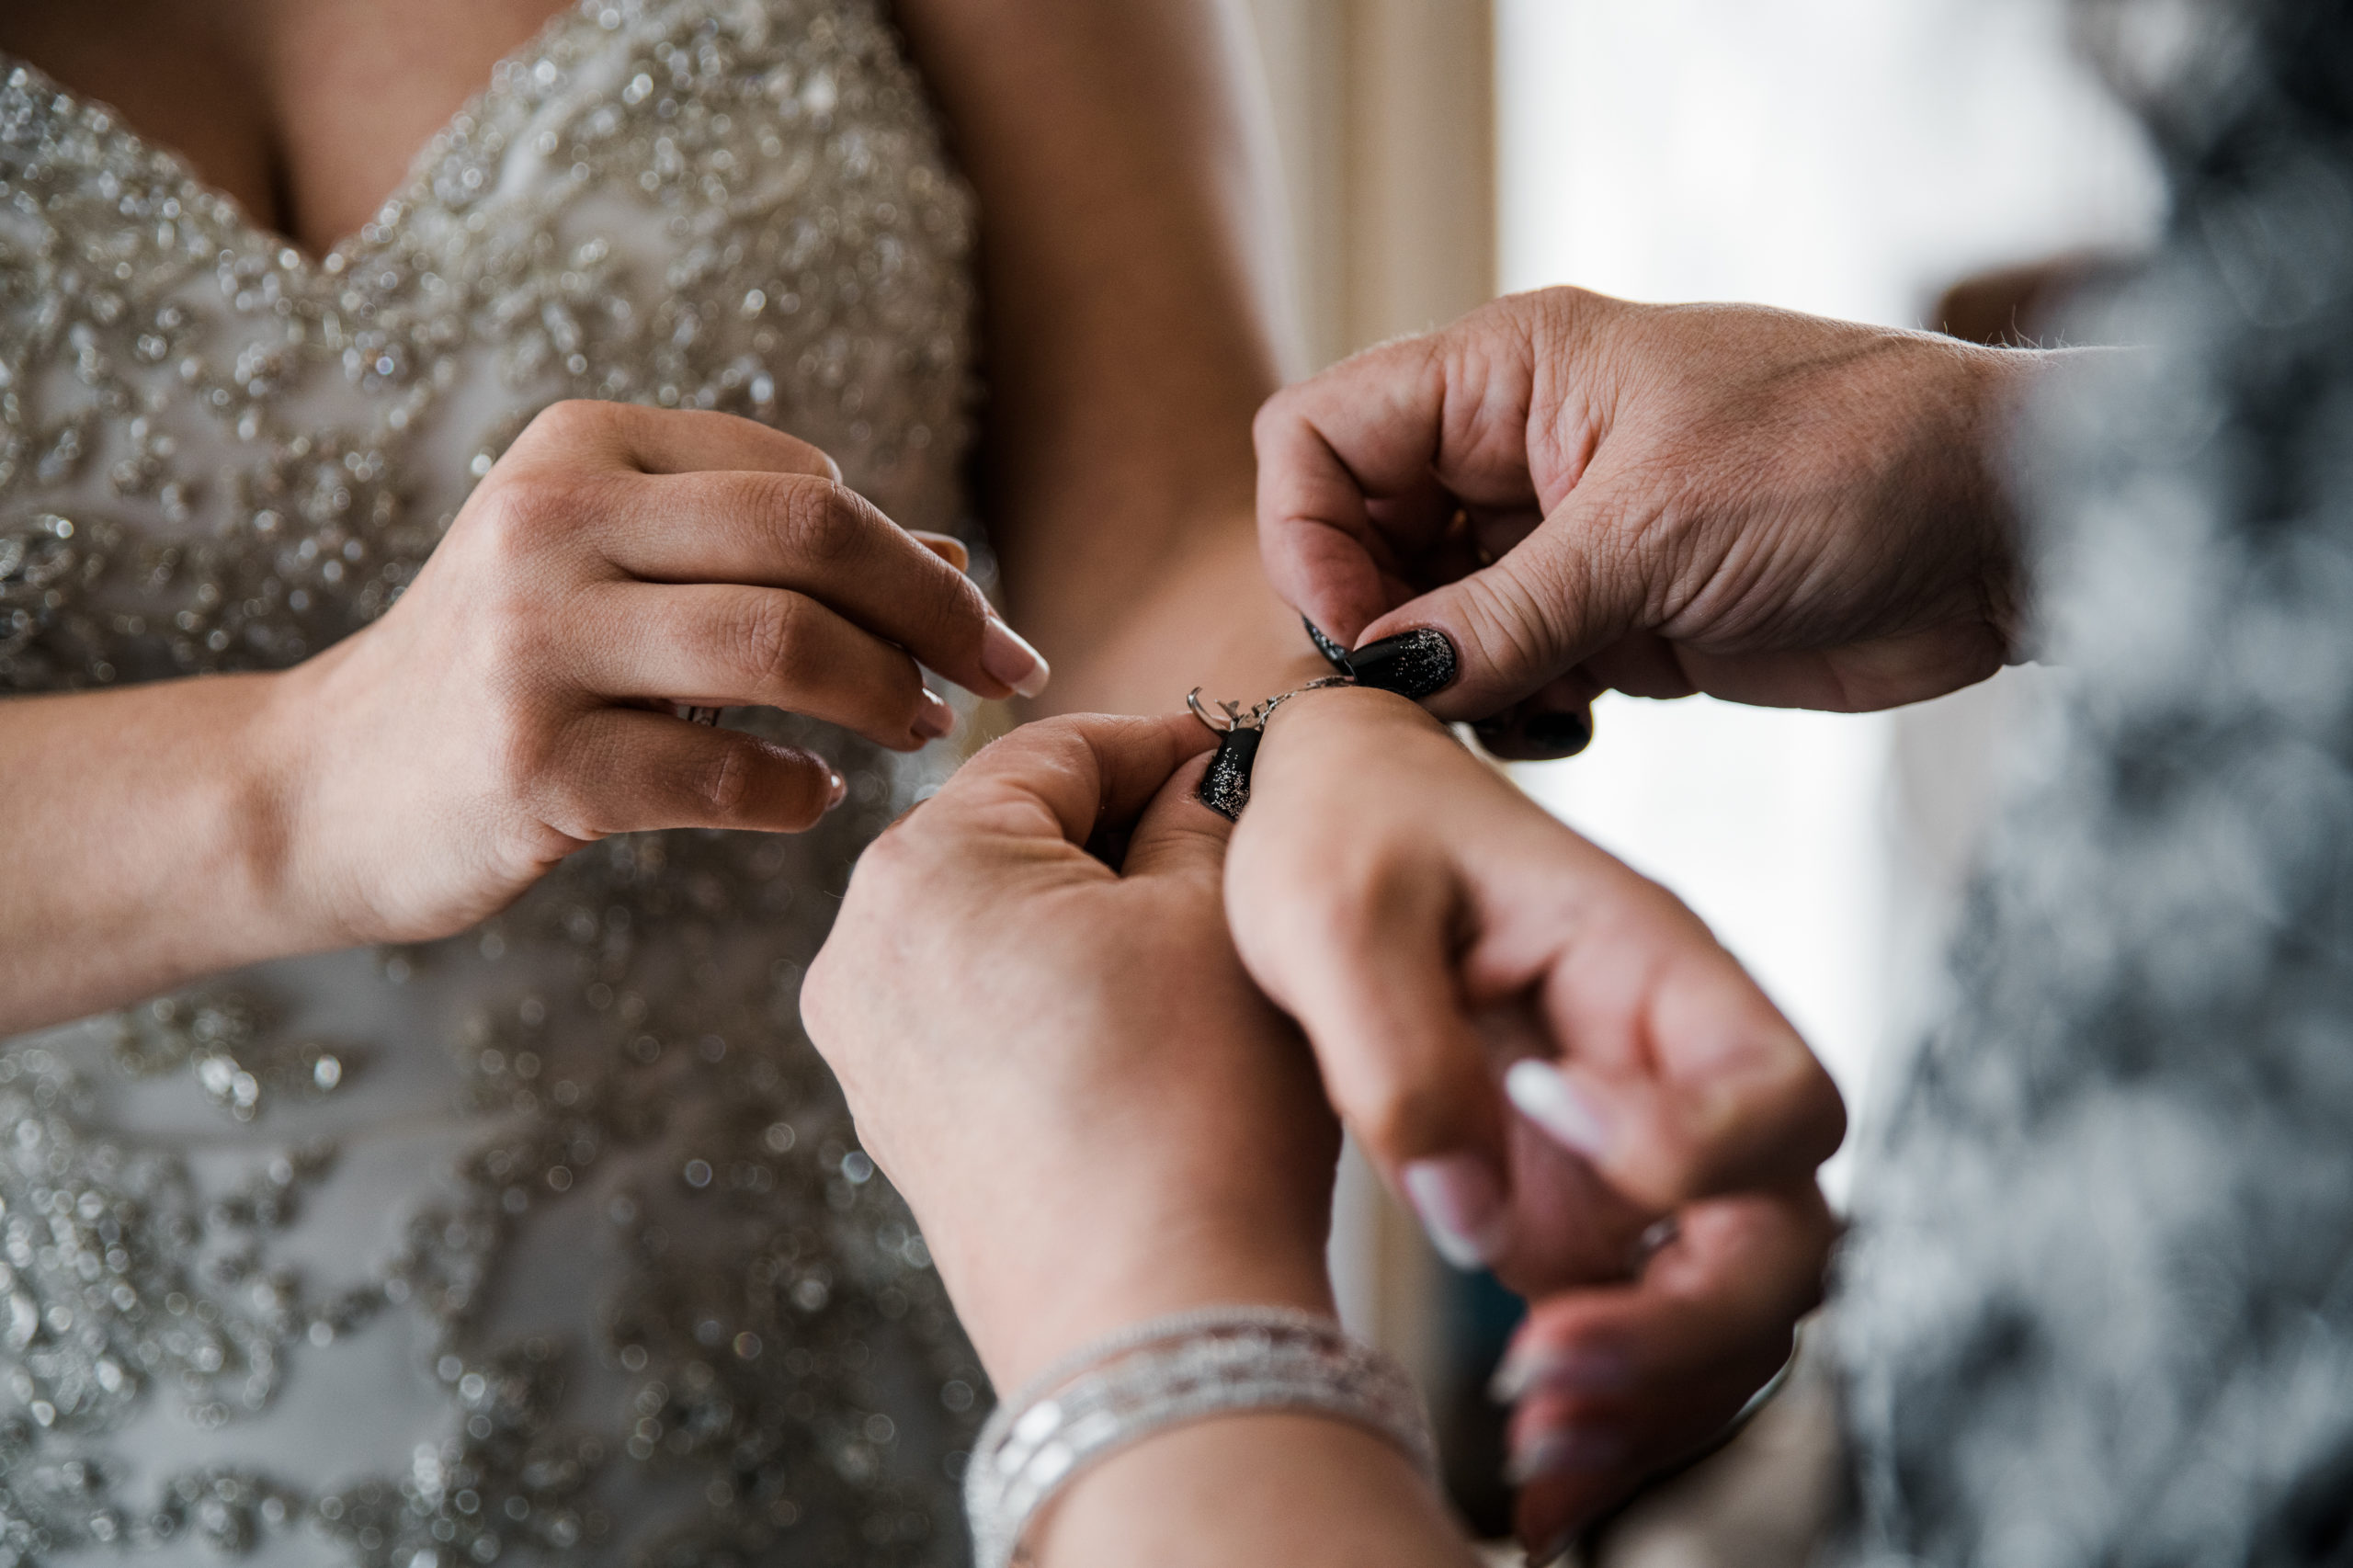 Close up of hands putting a bracelet on the bride's wrist.